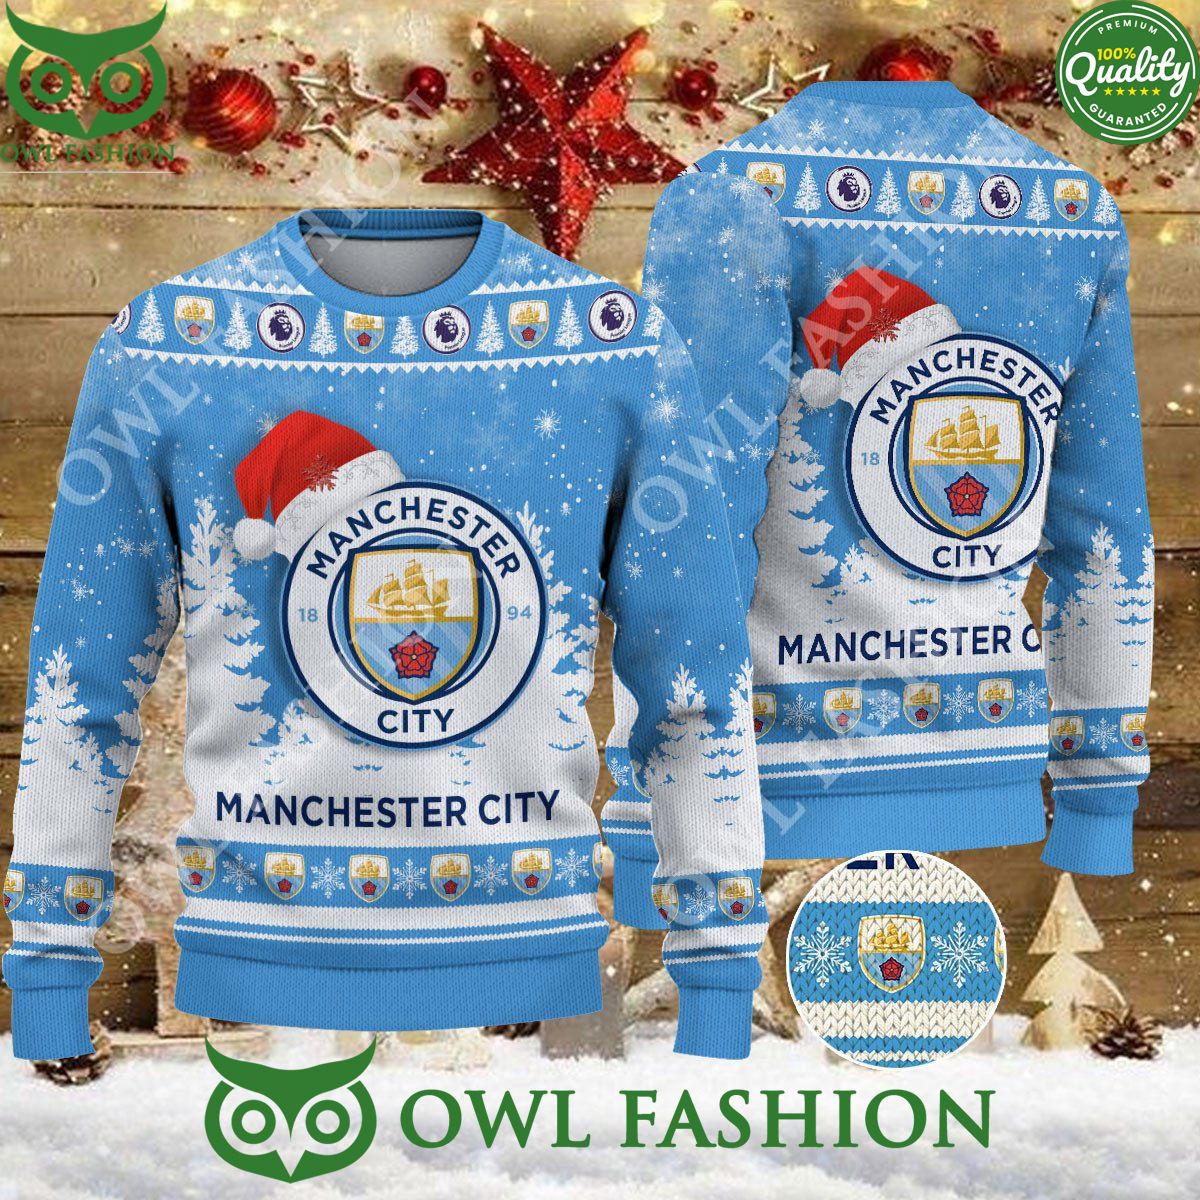 Christmas Football Manchester City F.C EFL Ugly Premier League Sweater Jumper